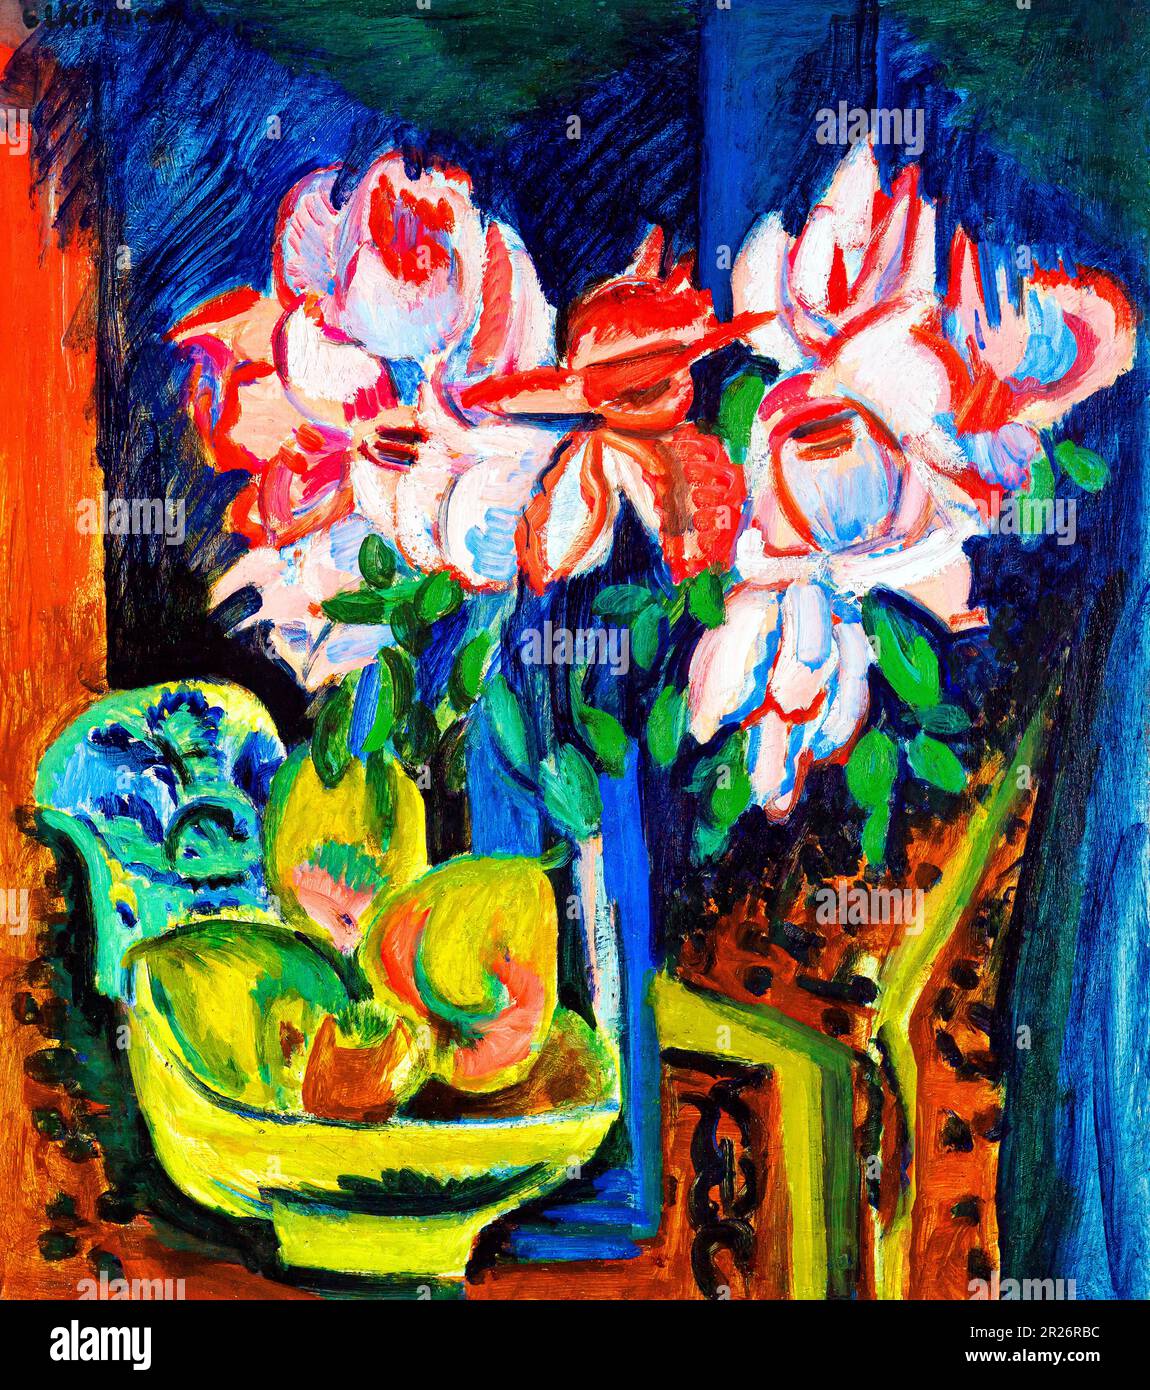 Ernst Ludwig Kirchner's Pink Roses famous painting. Original from the Saint Louis Art Museum. Stock Photo